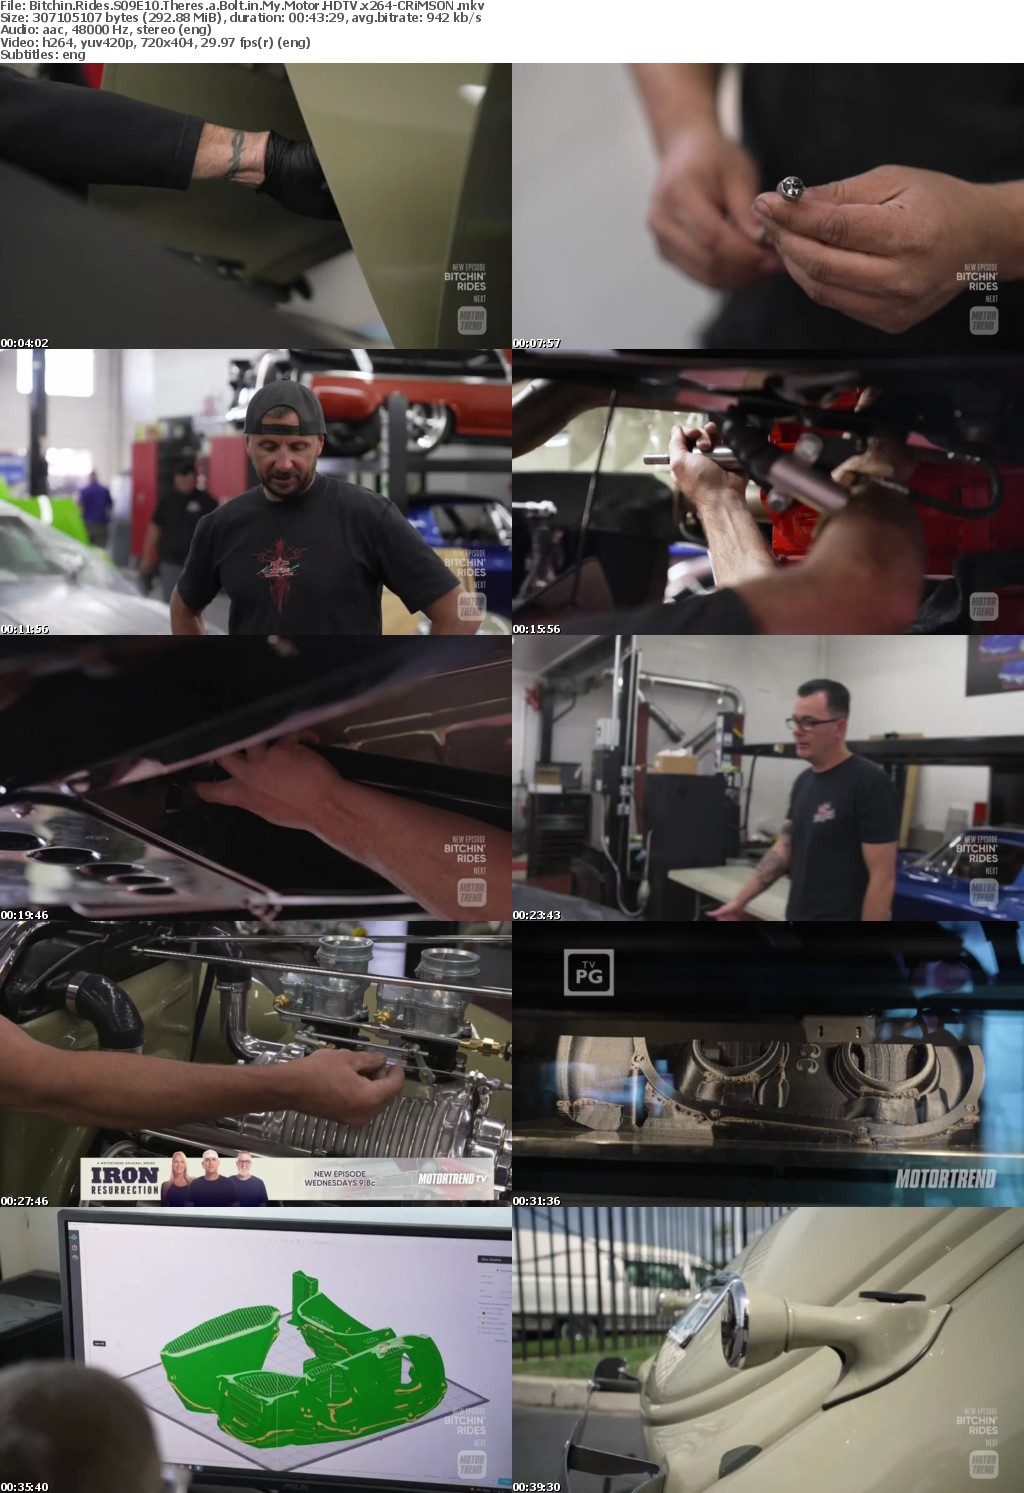 Bitchin Rides S09E10 Theres a Bolt in My Motor HDTV x264-CRiMSON